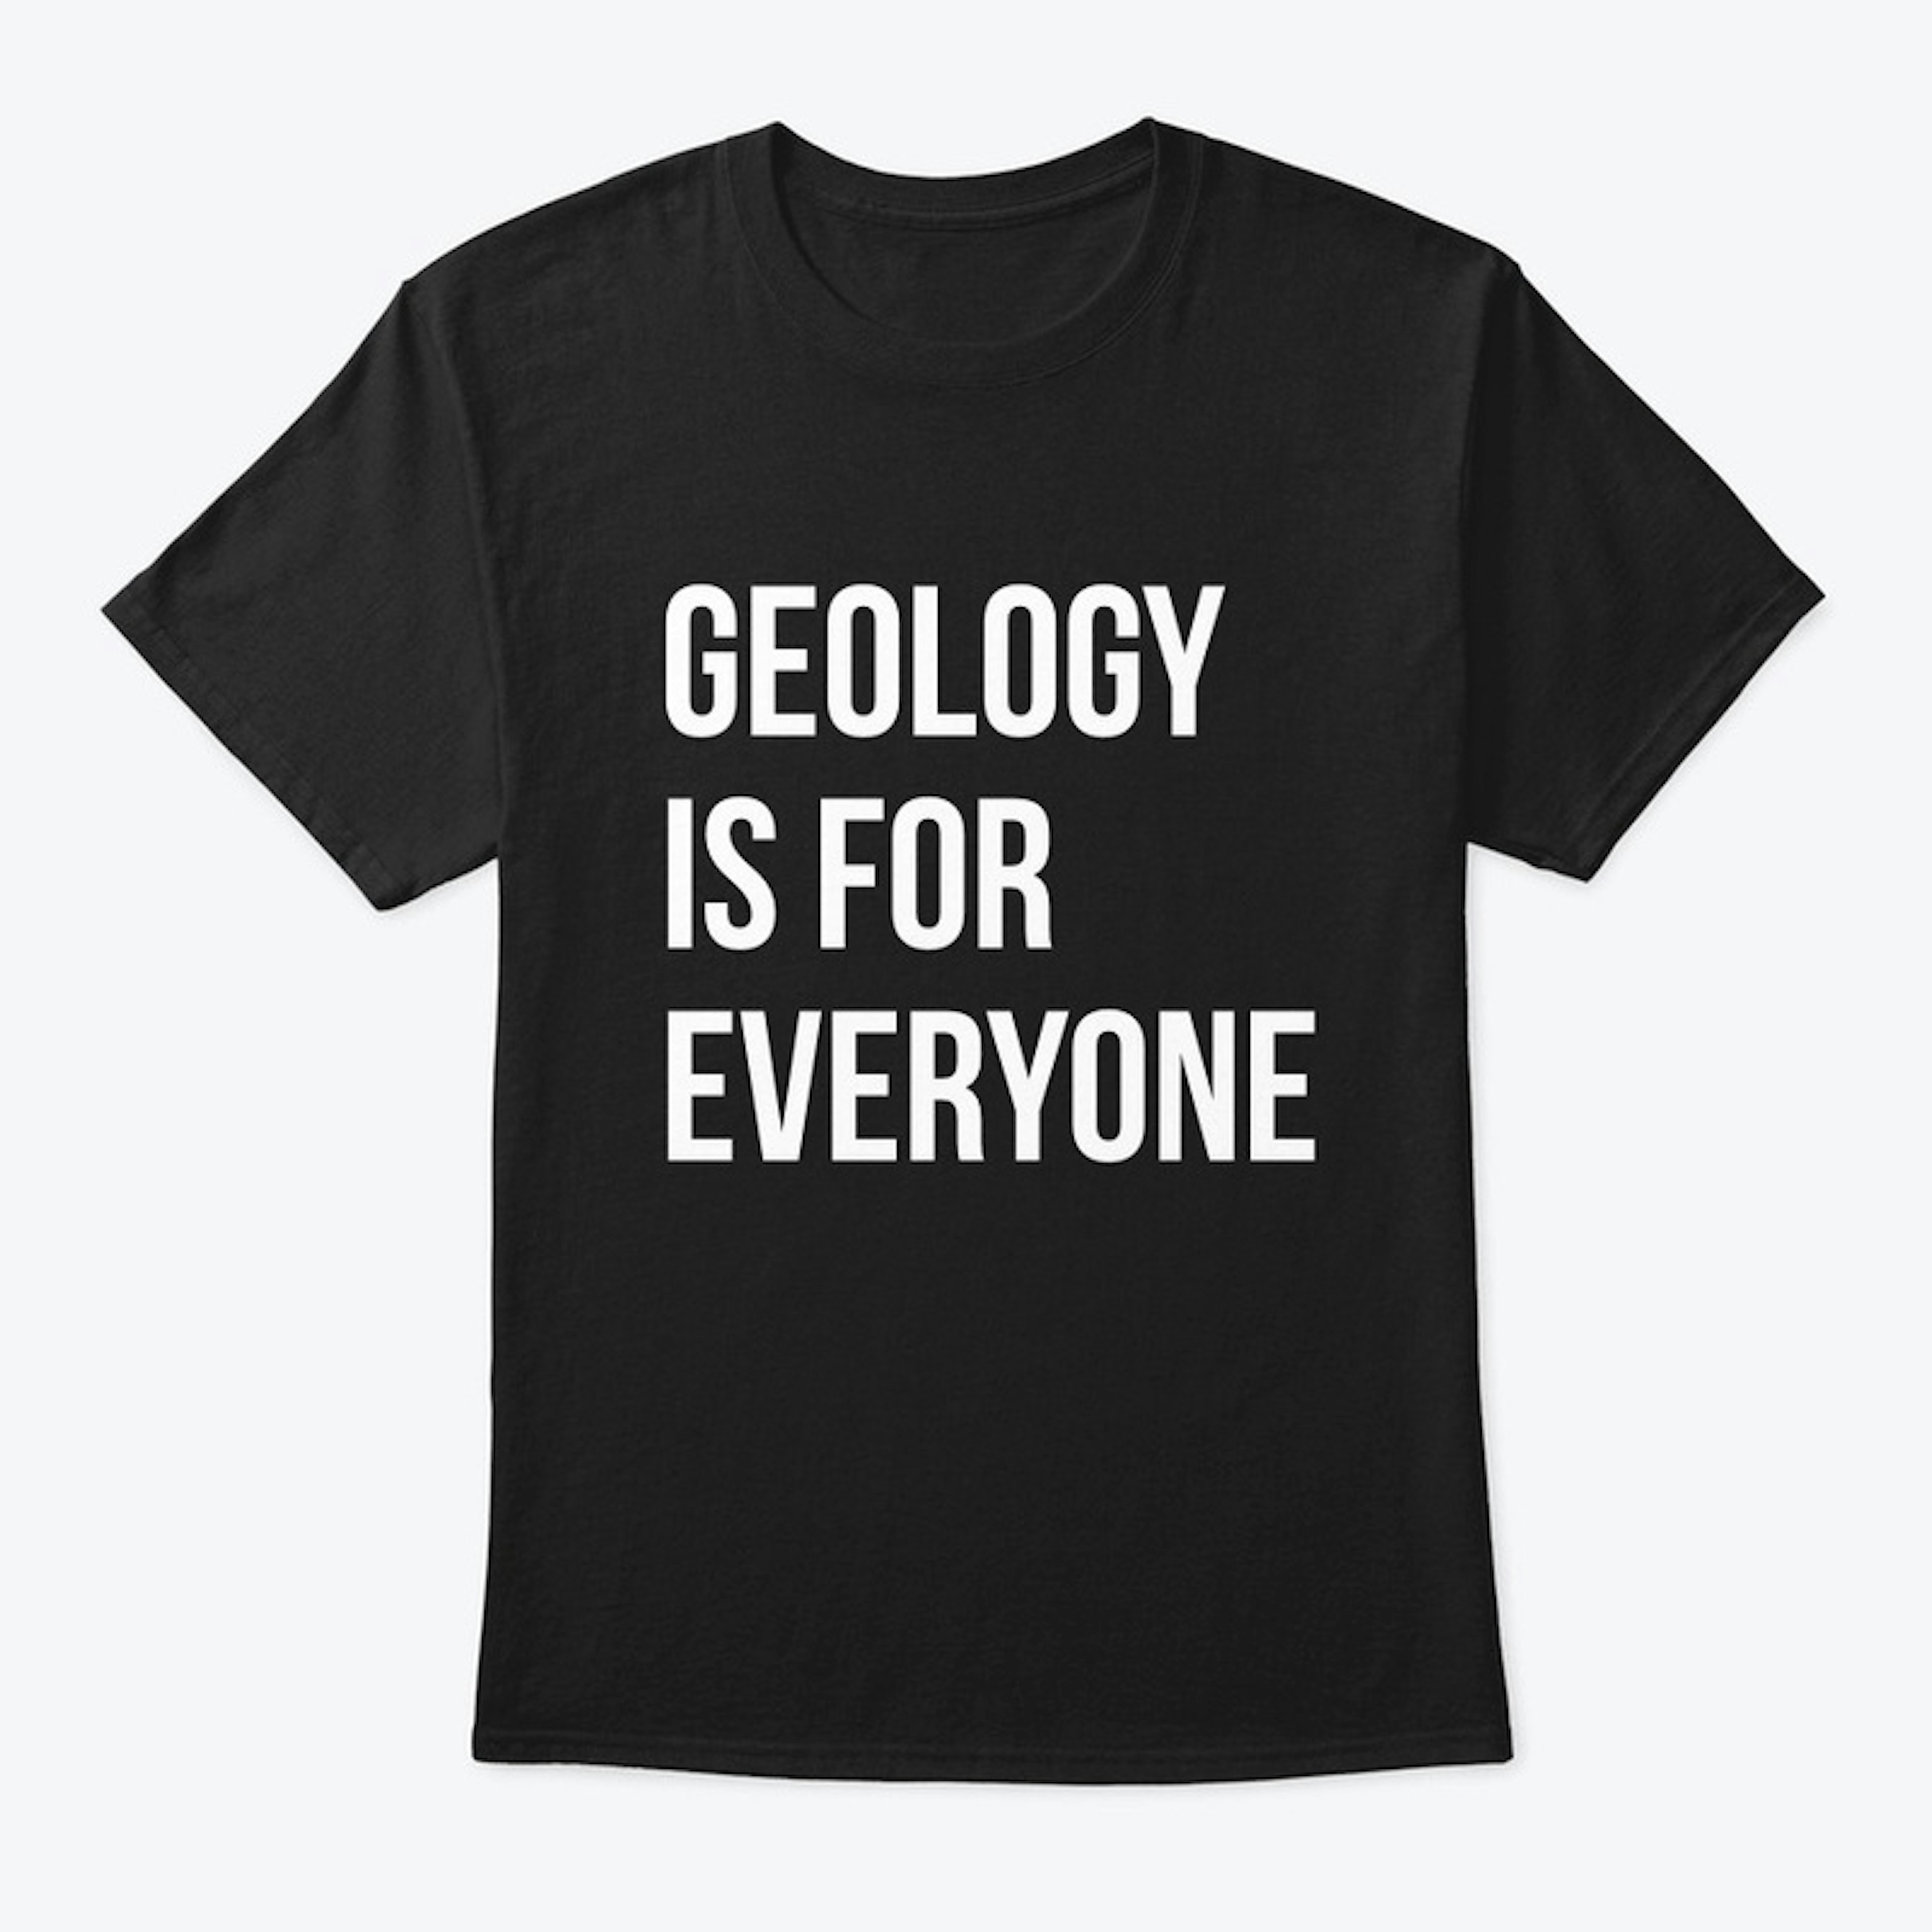 Geology is for everyone